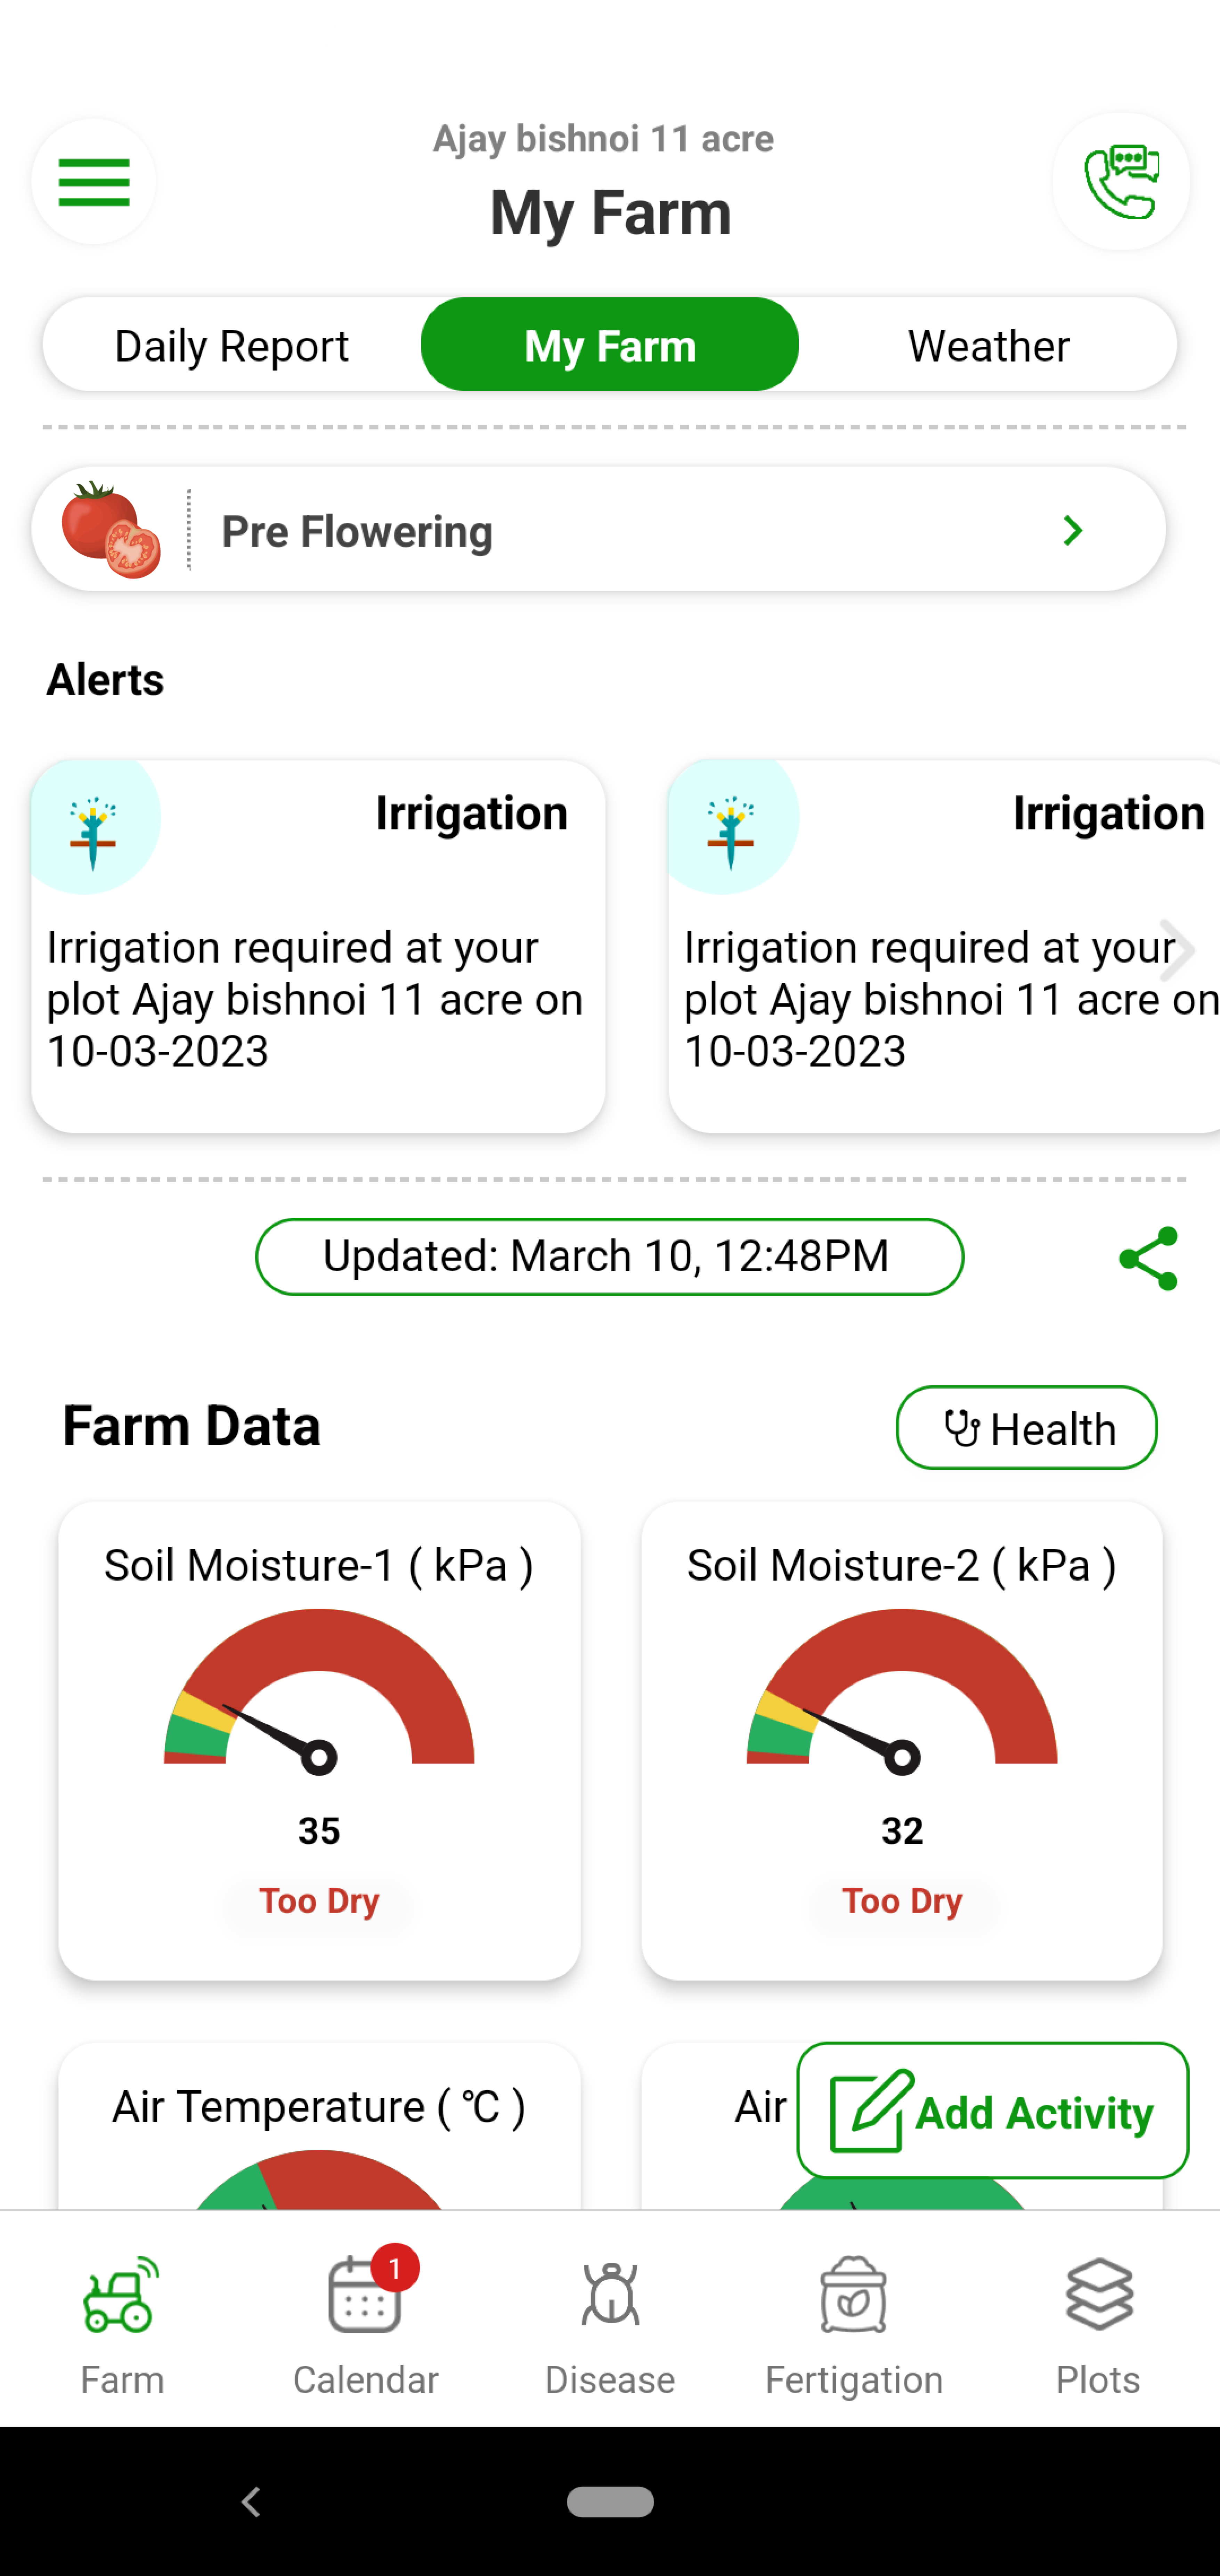 Too much water or too less water can be very harmful for tomato. Over irrigation leads to wilting in the plants. Tomato’s water requirements vary based on soil type and stage. With Fyllo’s device containing soil moisture and soil temperature sensor and intelligent software, you get alerts on how much water to provide to the crop. You can also see and visualize evapotranspiration (Etc) values of the crop. You can perfectly manage the water requirements to get the perfect size, color and sugar.